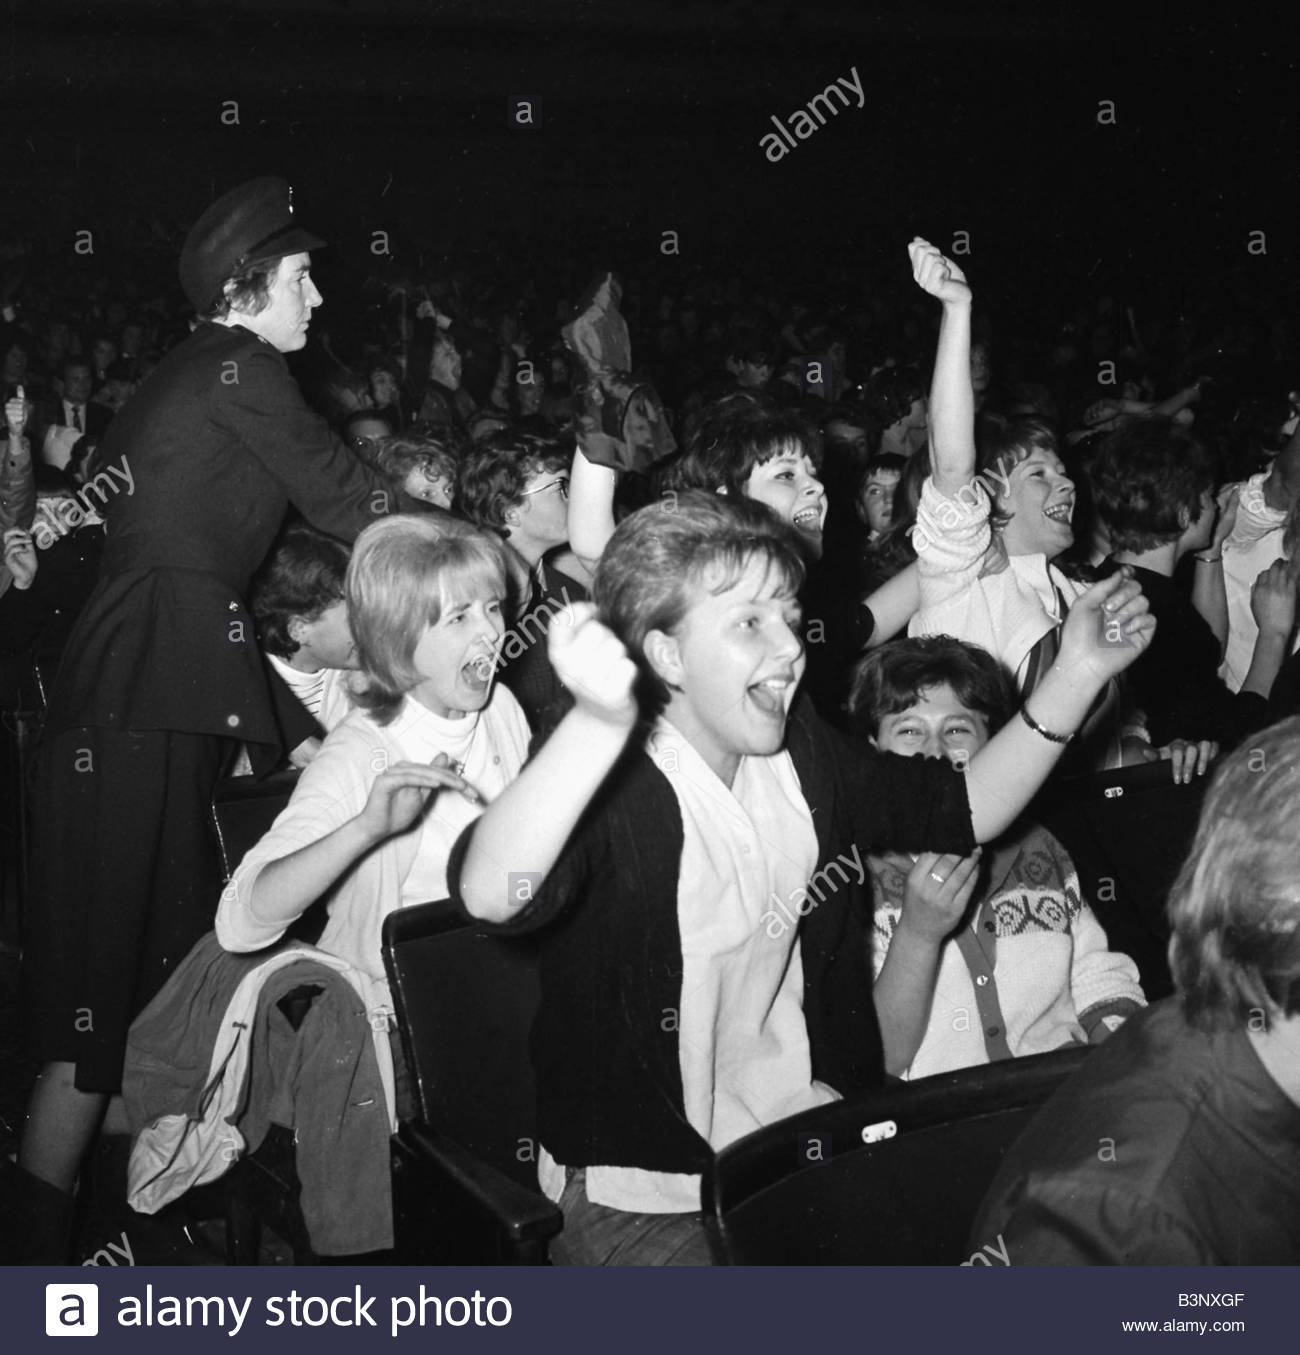 The Beatles November 1963 Fans of The Beatles cheer and scream during ...